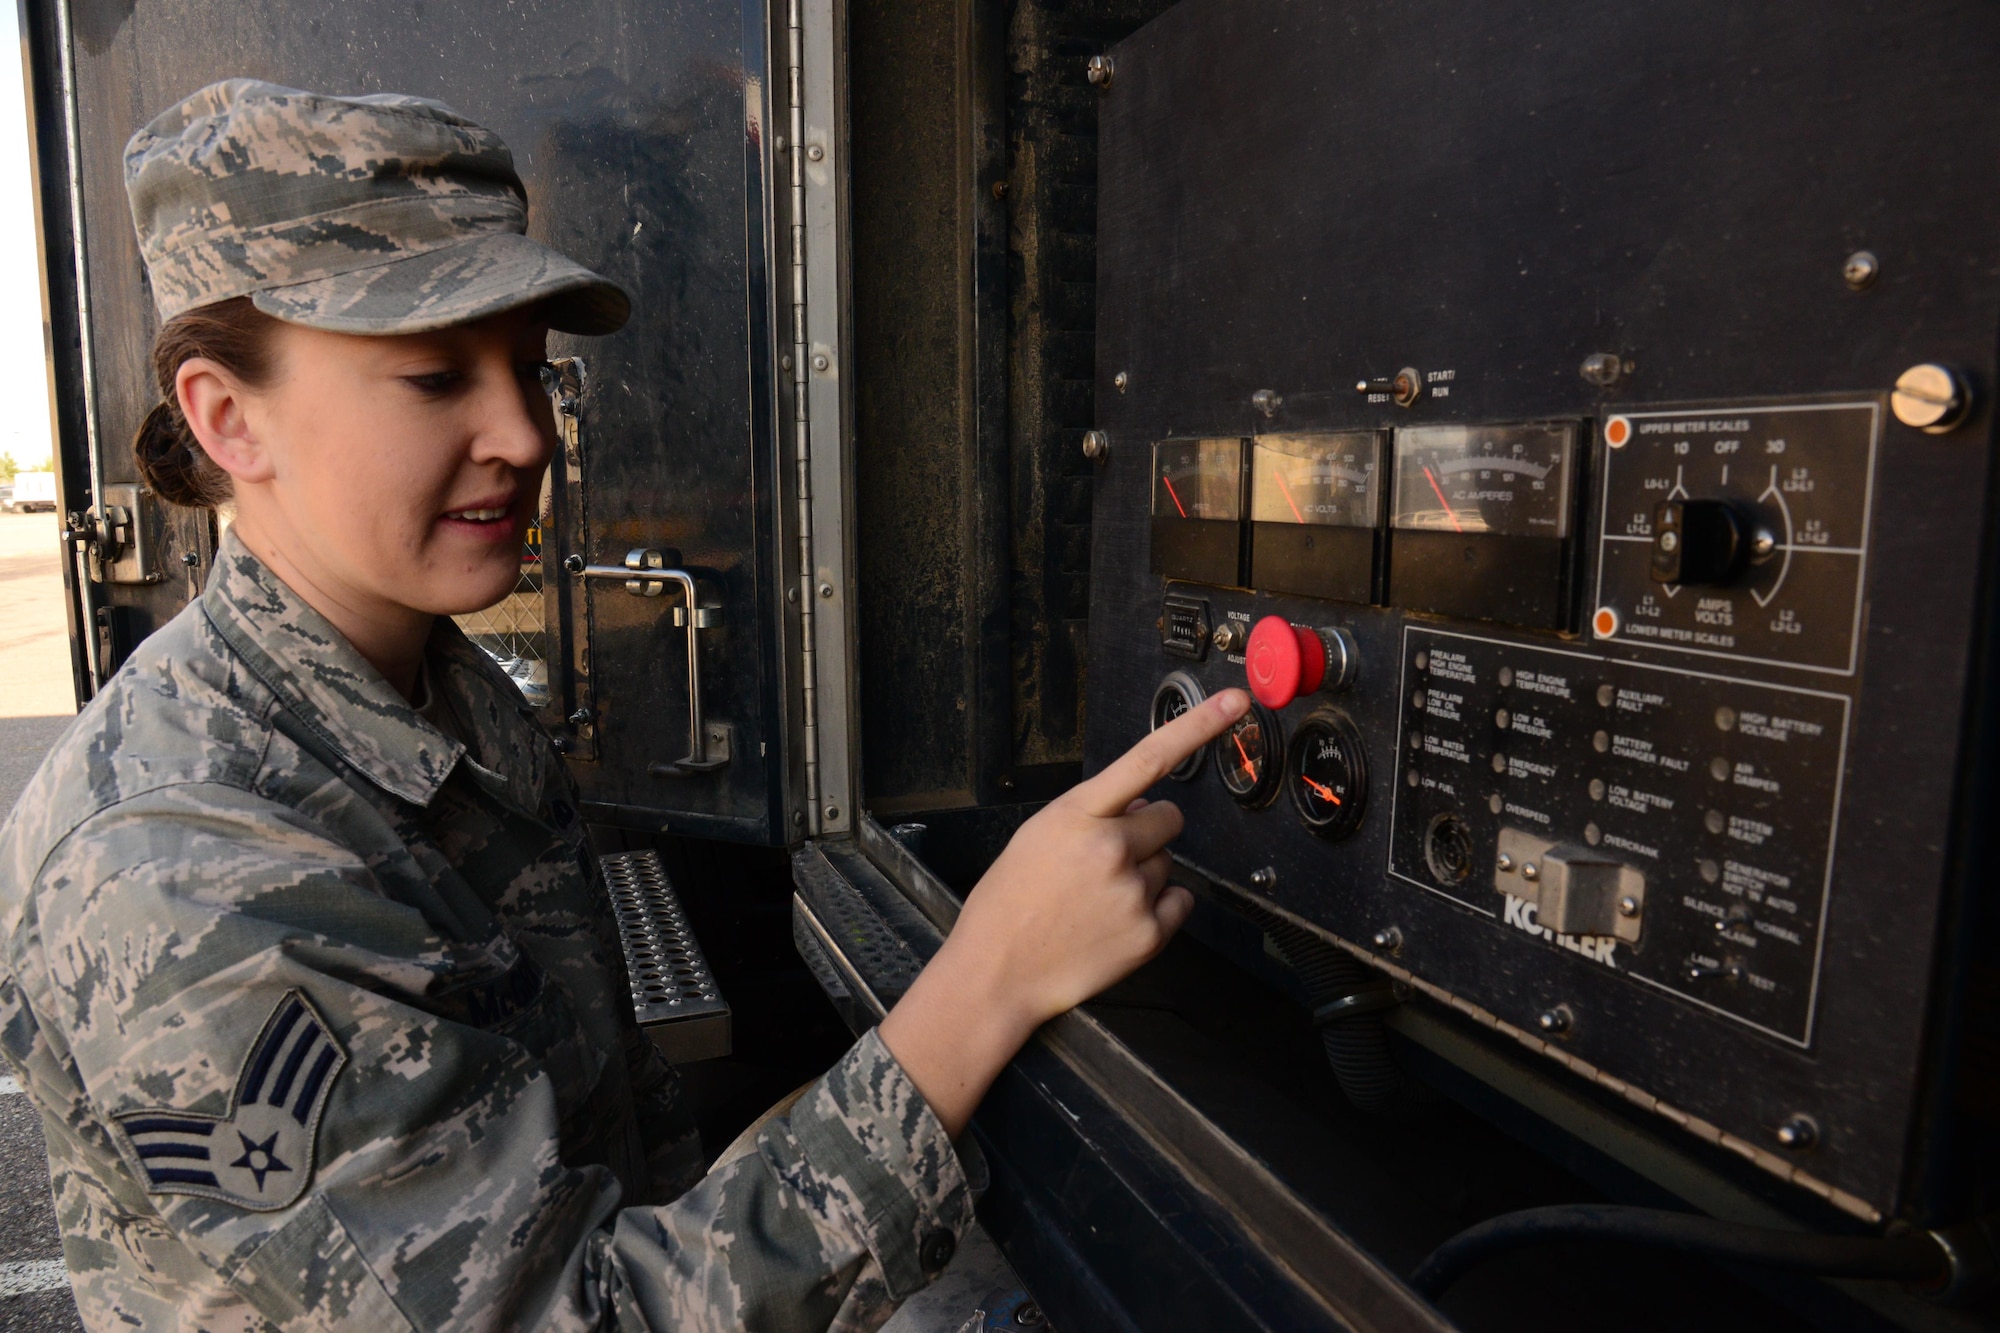 Senior Airman Taleah McGriff, 741st Maintenance Squadron power refrigeration and electrical lab technician, inspects an electrical panel Aug. 25, 2016, at Malmstrom Air Force Base, Mont. McGriff was hand selected to represent Air Force Global Strike Command at the 2016 Air Force Association's Air, Space and Cyber Convention held in Washington D.C. (U.S. Air Force photo/Airman 1st Class Magen M. Reeves)